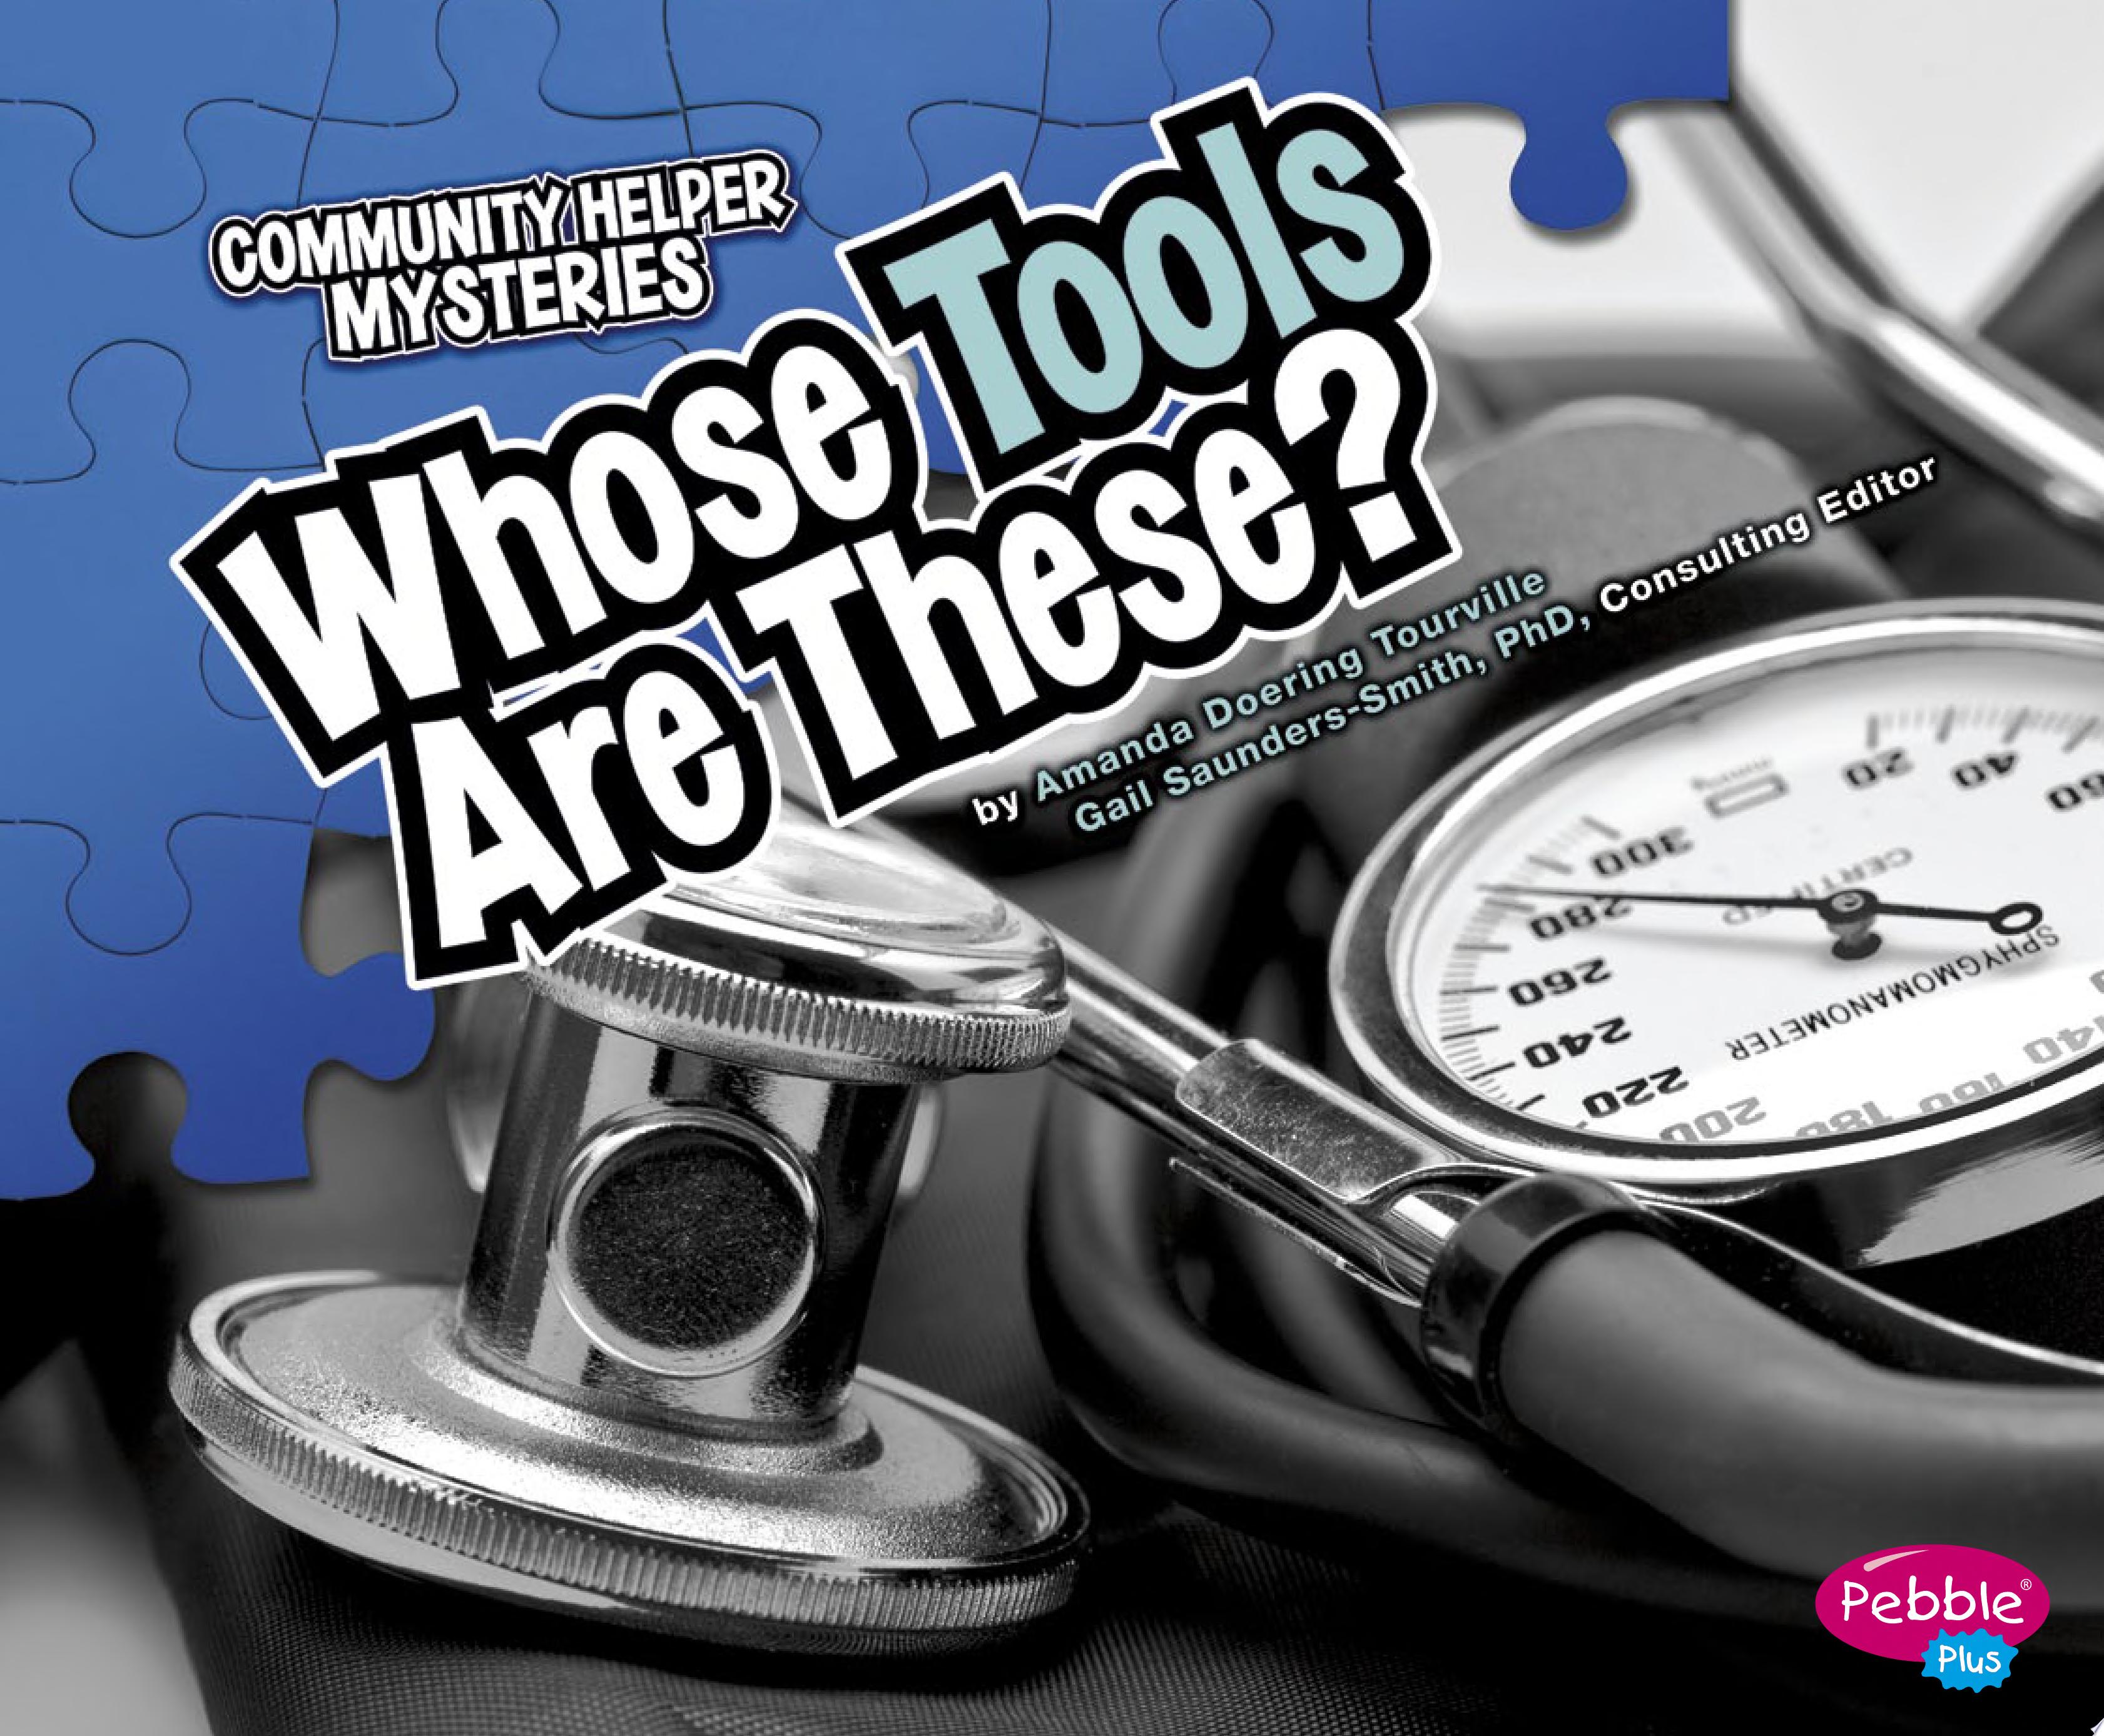 Image for "Whose Tools Are These?"